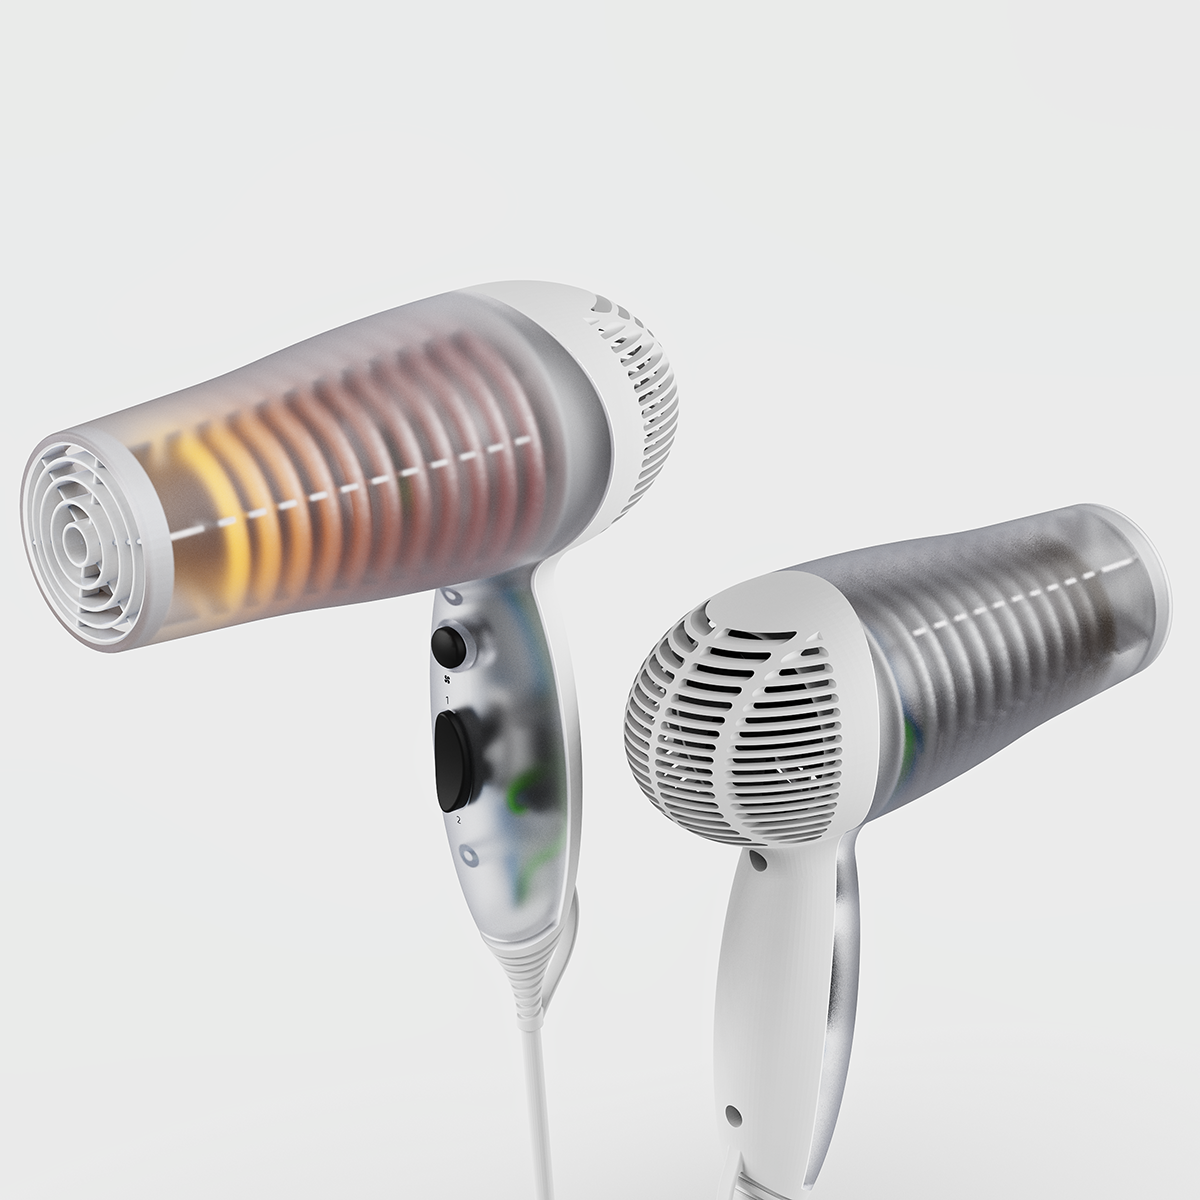 Rendering of a translucent hairdryer, paired